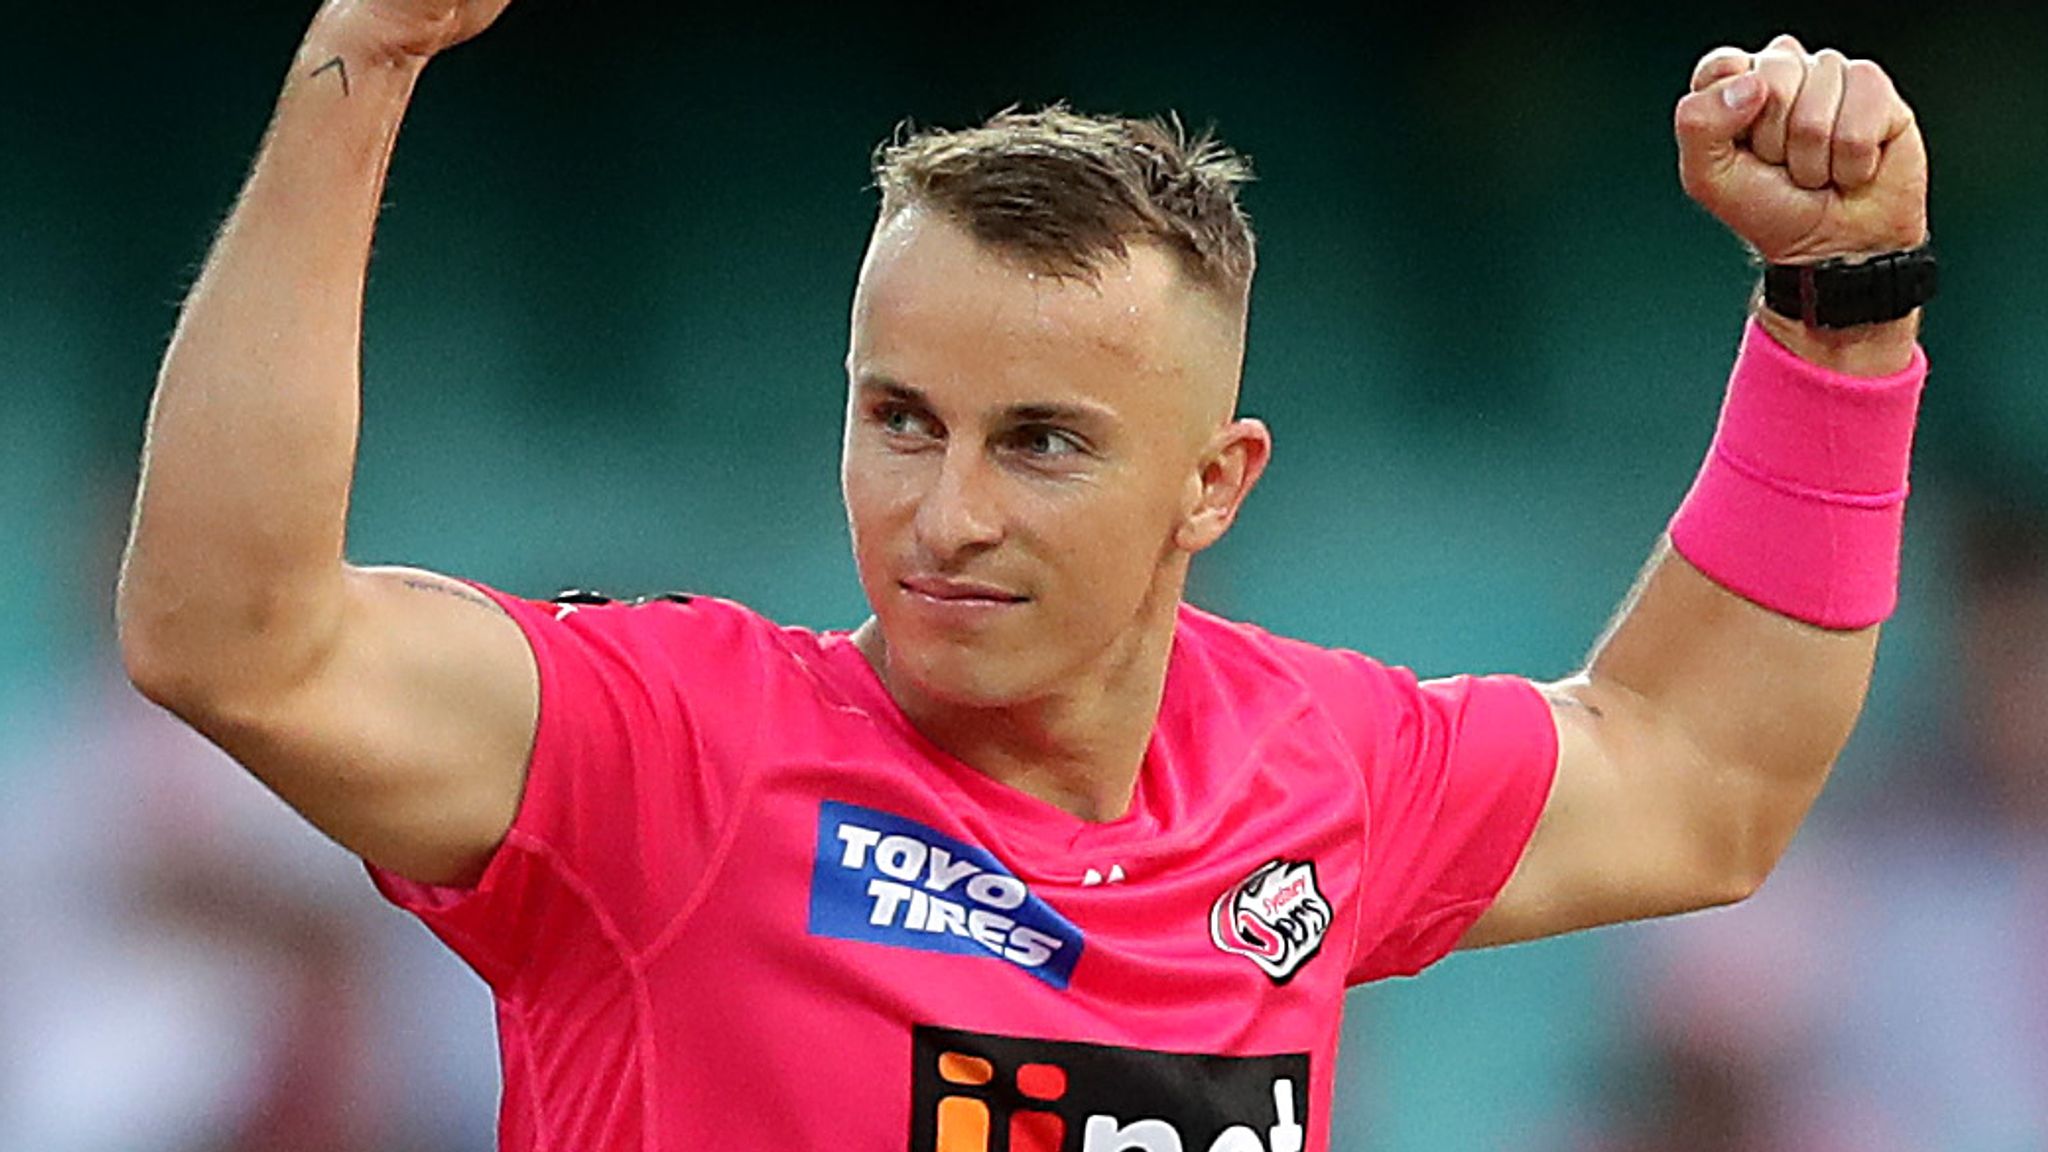 Tom Curran (Cricketer), Height, Age, Girlfriend, Wife, Children, Family, Biography & More